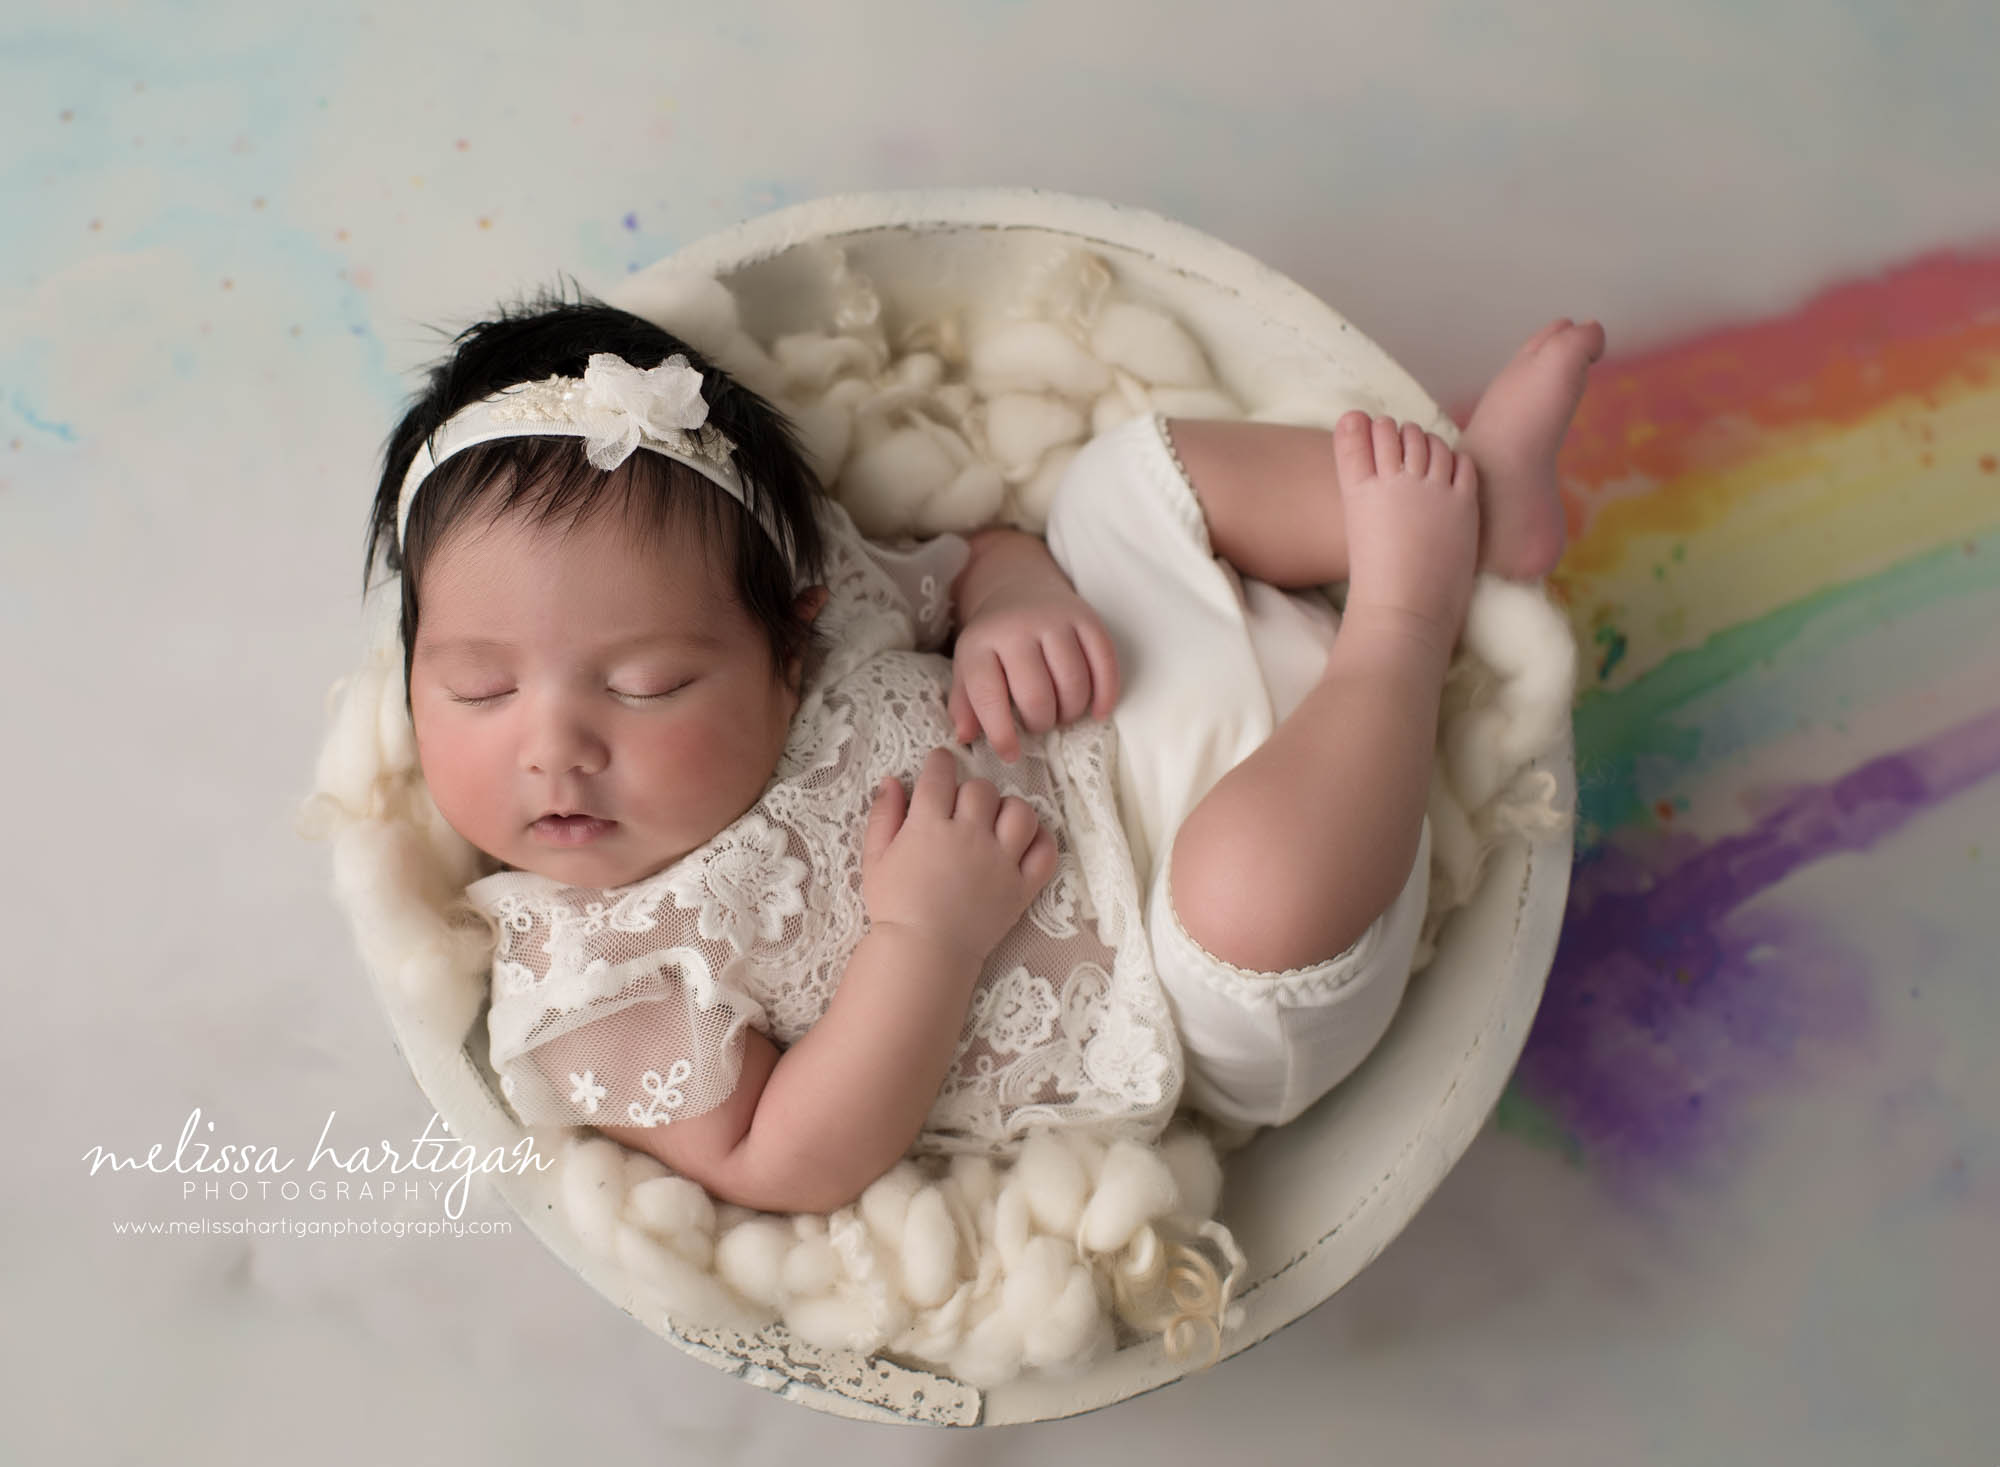 newborn baby girl posed in wooden bowl wearing cream outfit with rainbow coming out side